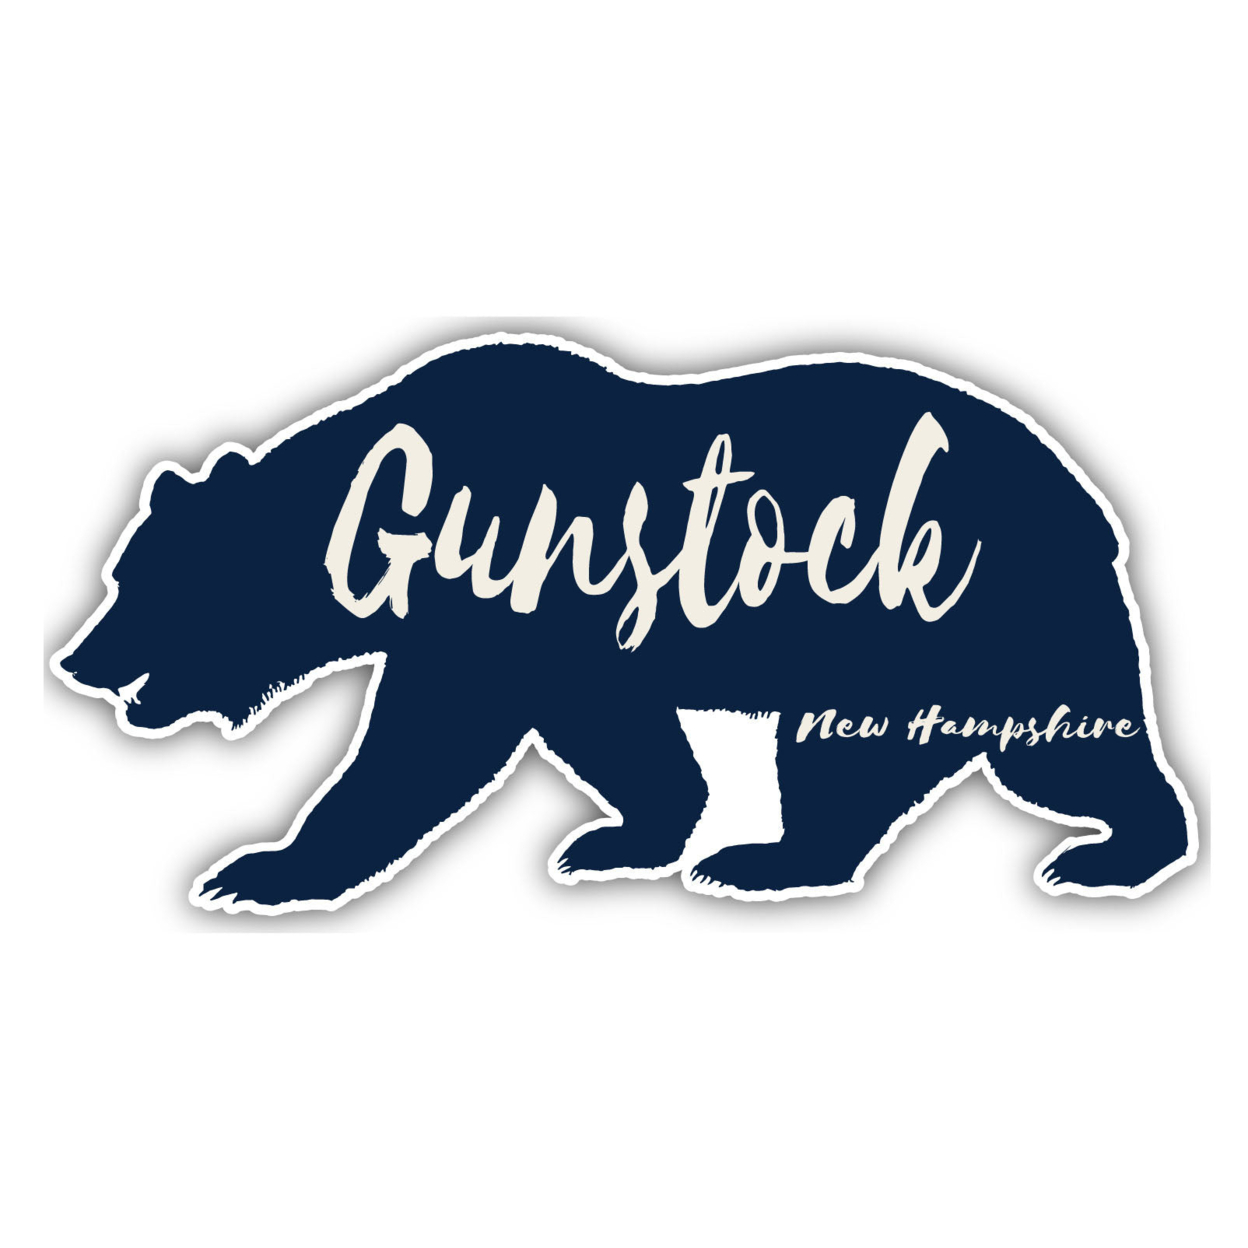 Gunstock New Hampshire Souvenir Decorative Stickers (Choose Theme And Size) - 4-Pack, 8-Inch, Bear